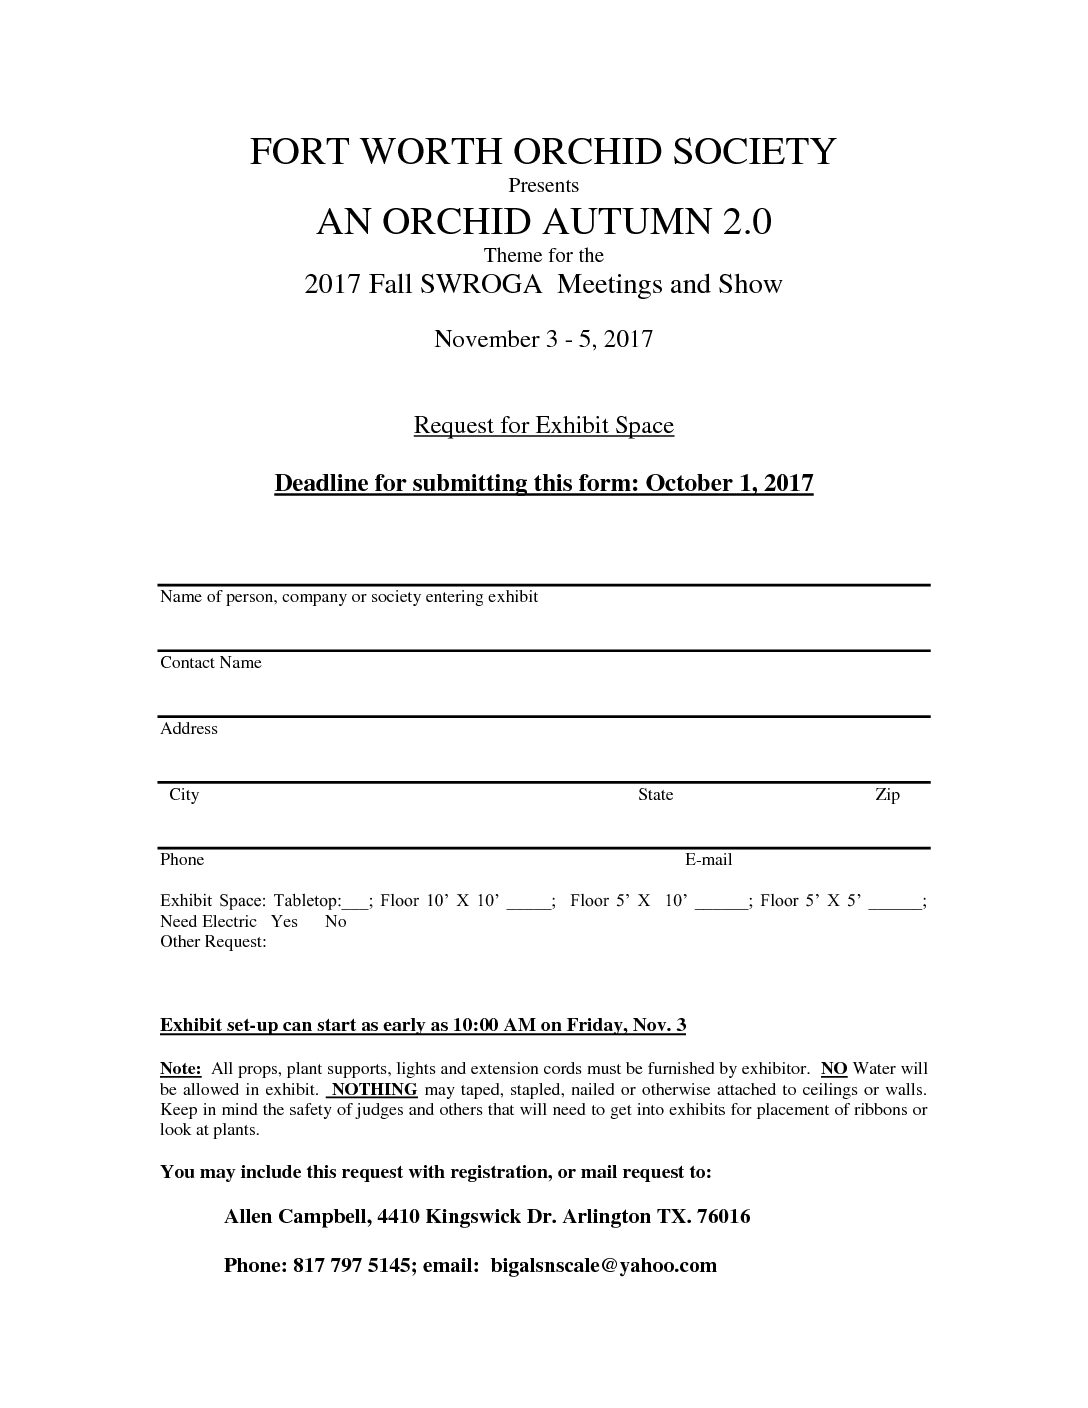 Acadian Orchid Society - Musical Orchids